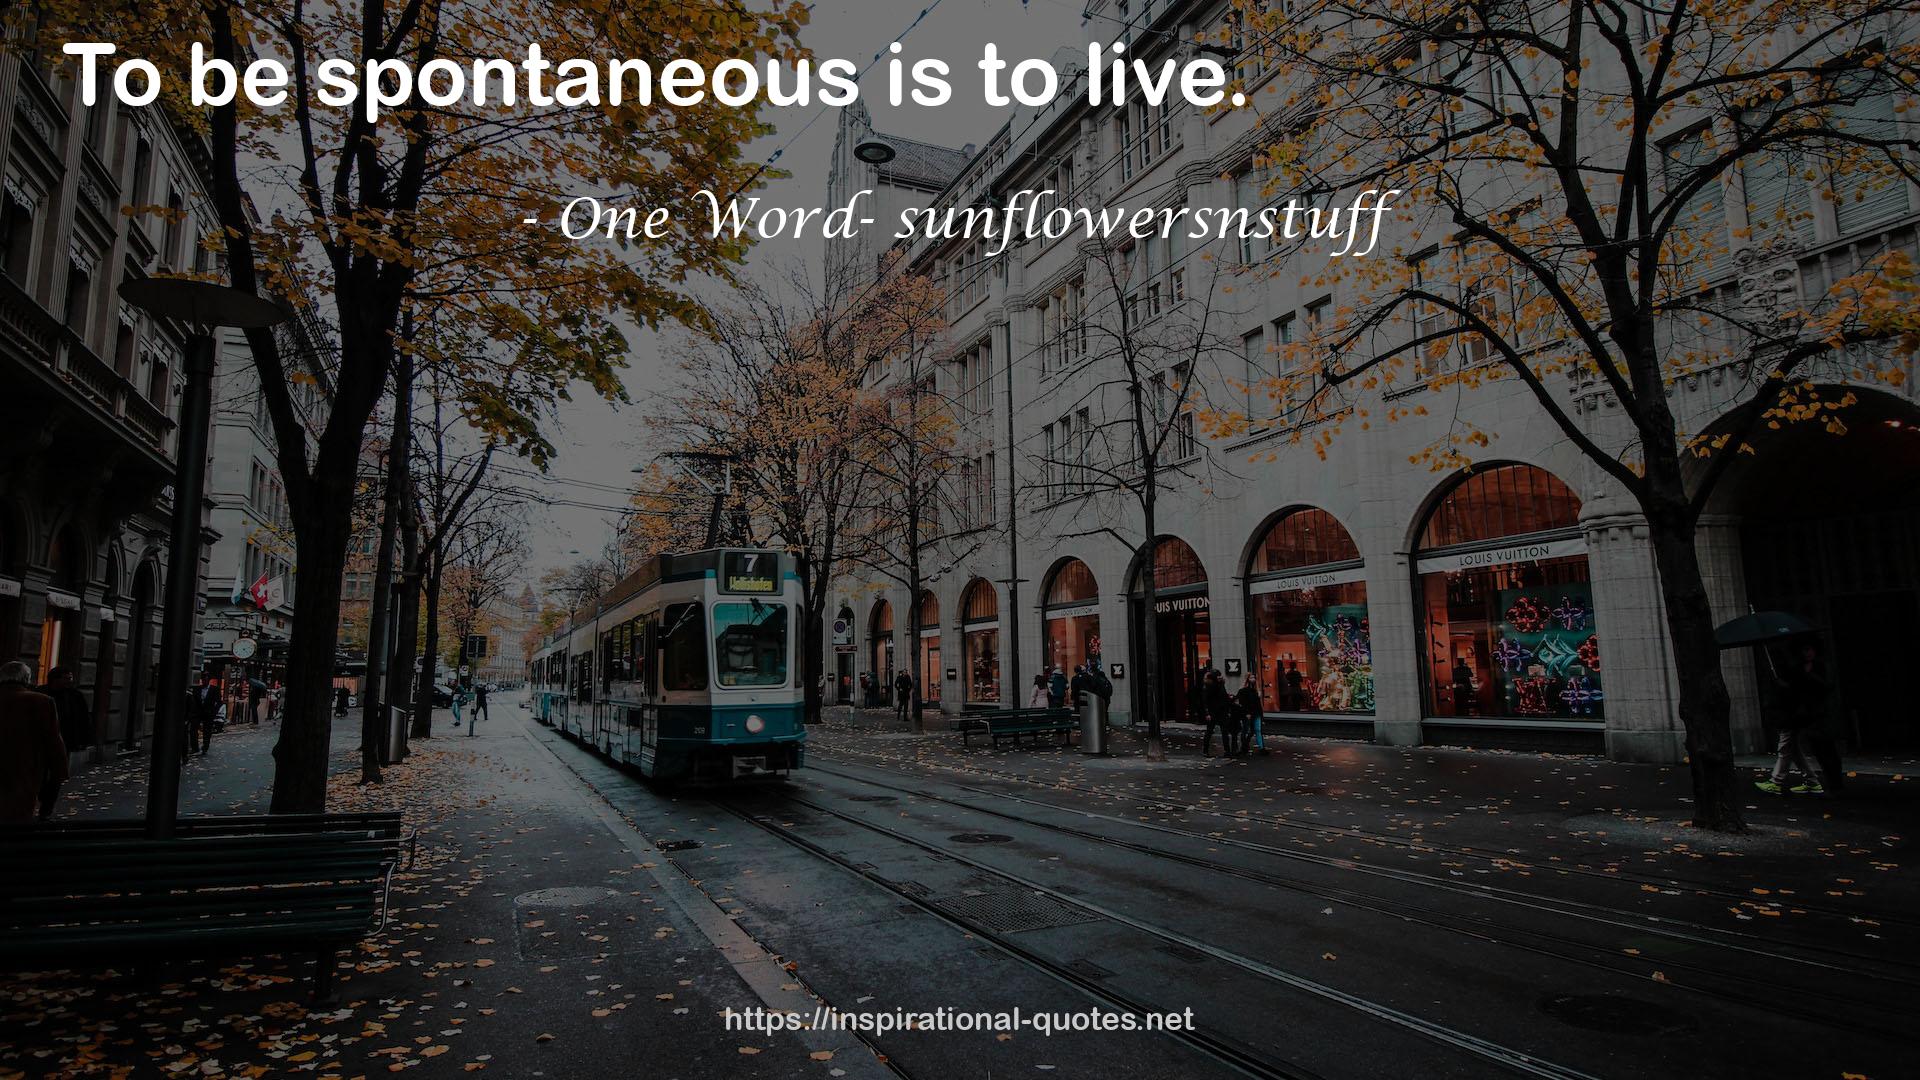 One Word- sunflowersnstuff QUOTES